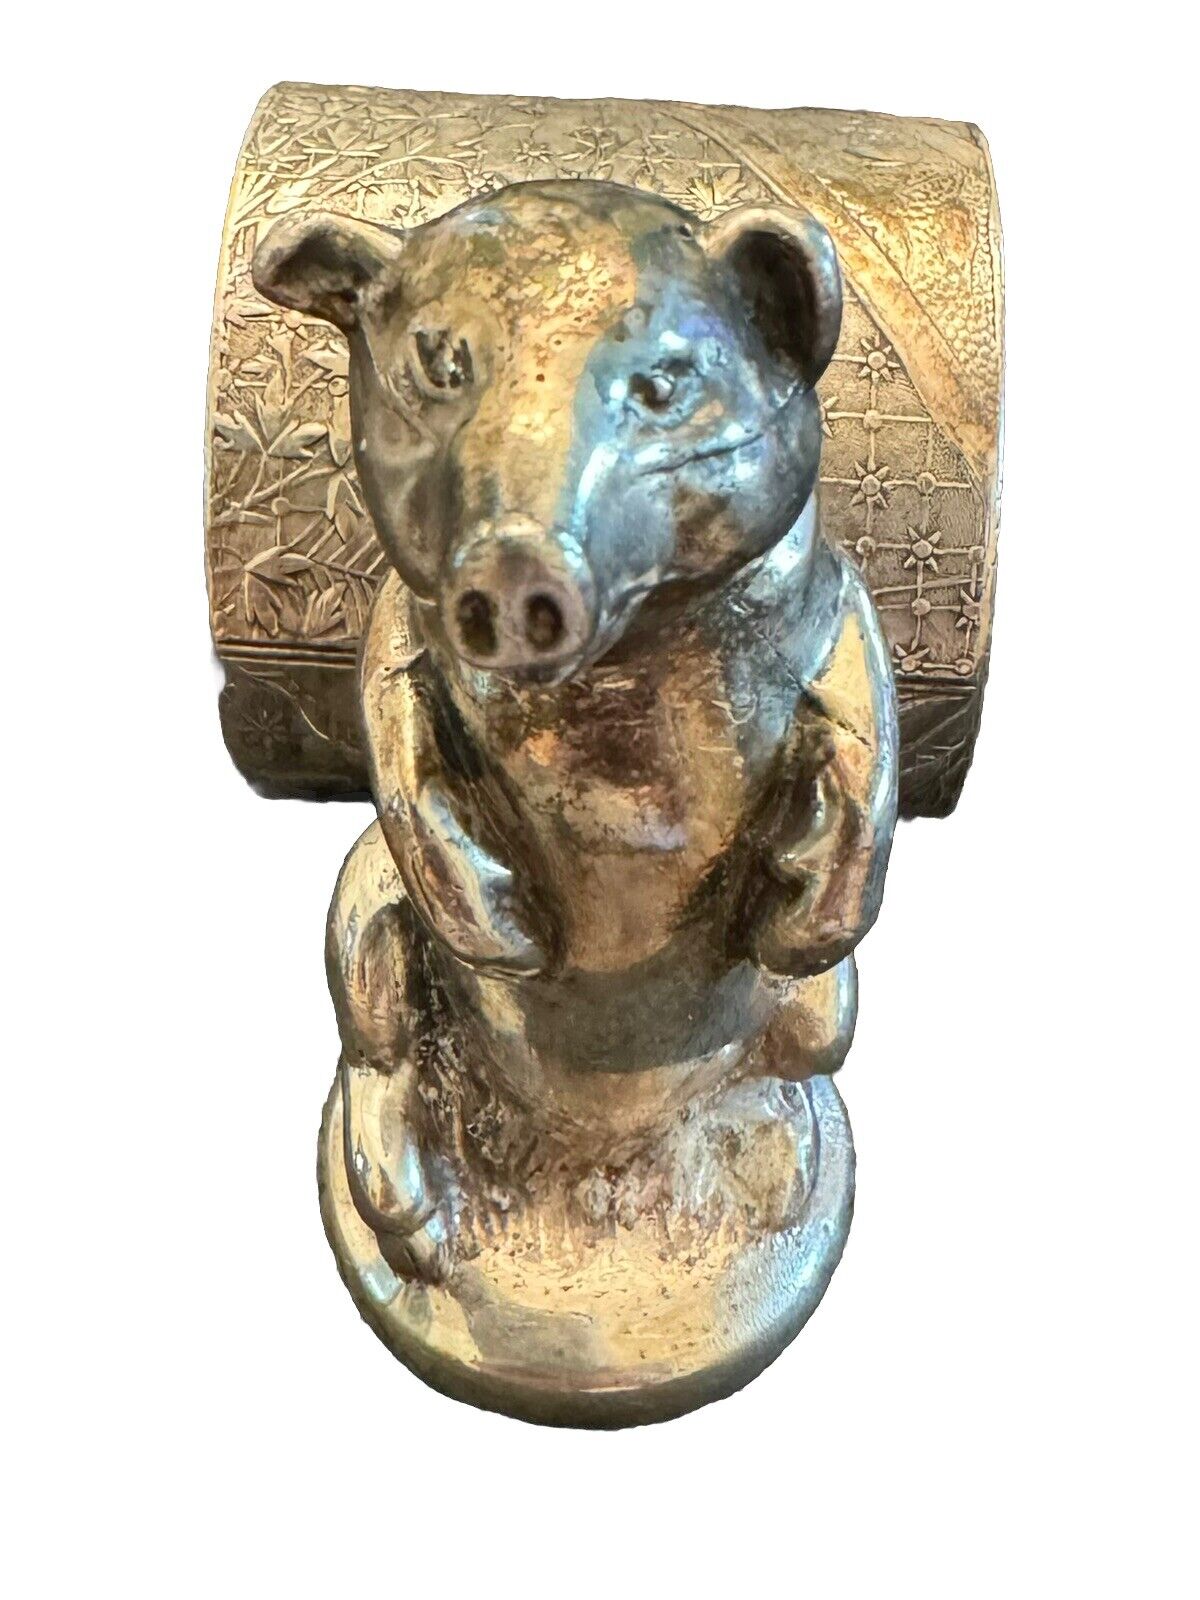 Antique Silver Plate Standing Pig Figural Napkin Holder - Very Rare